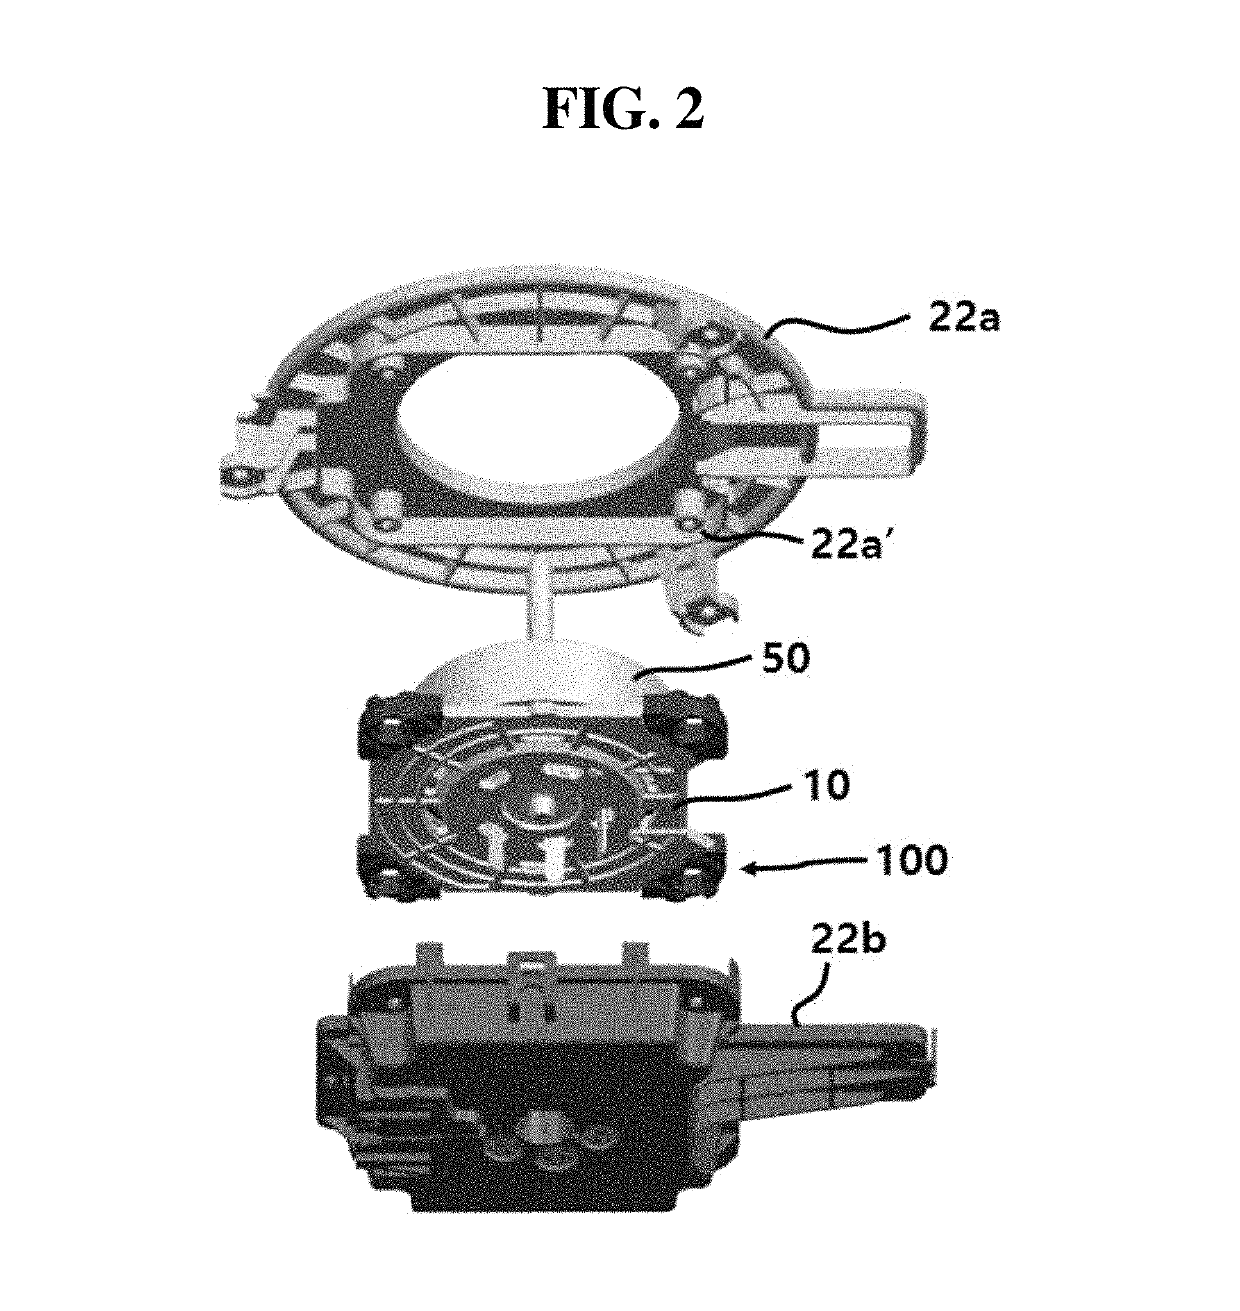 Motors with damper for reducing vibration and noise of rotor